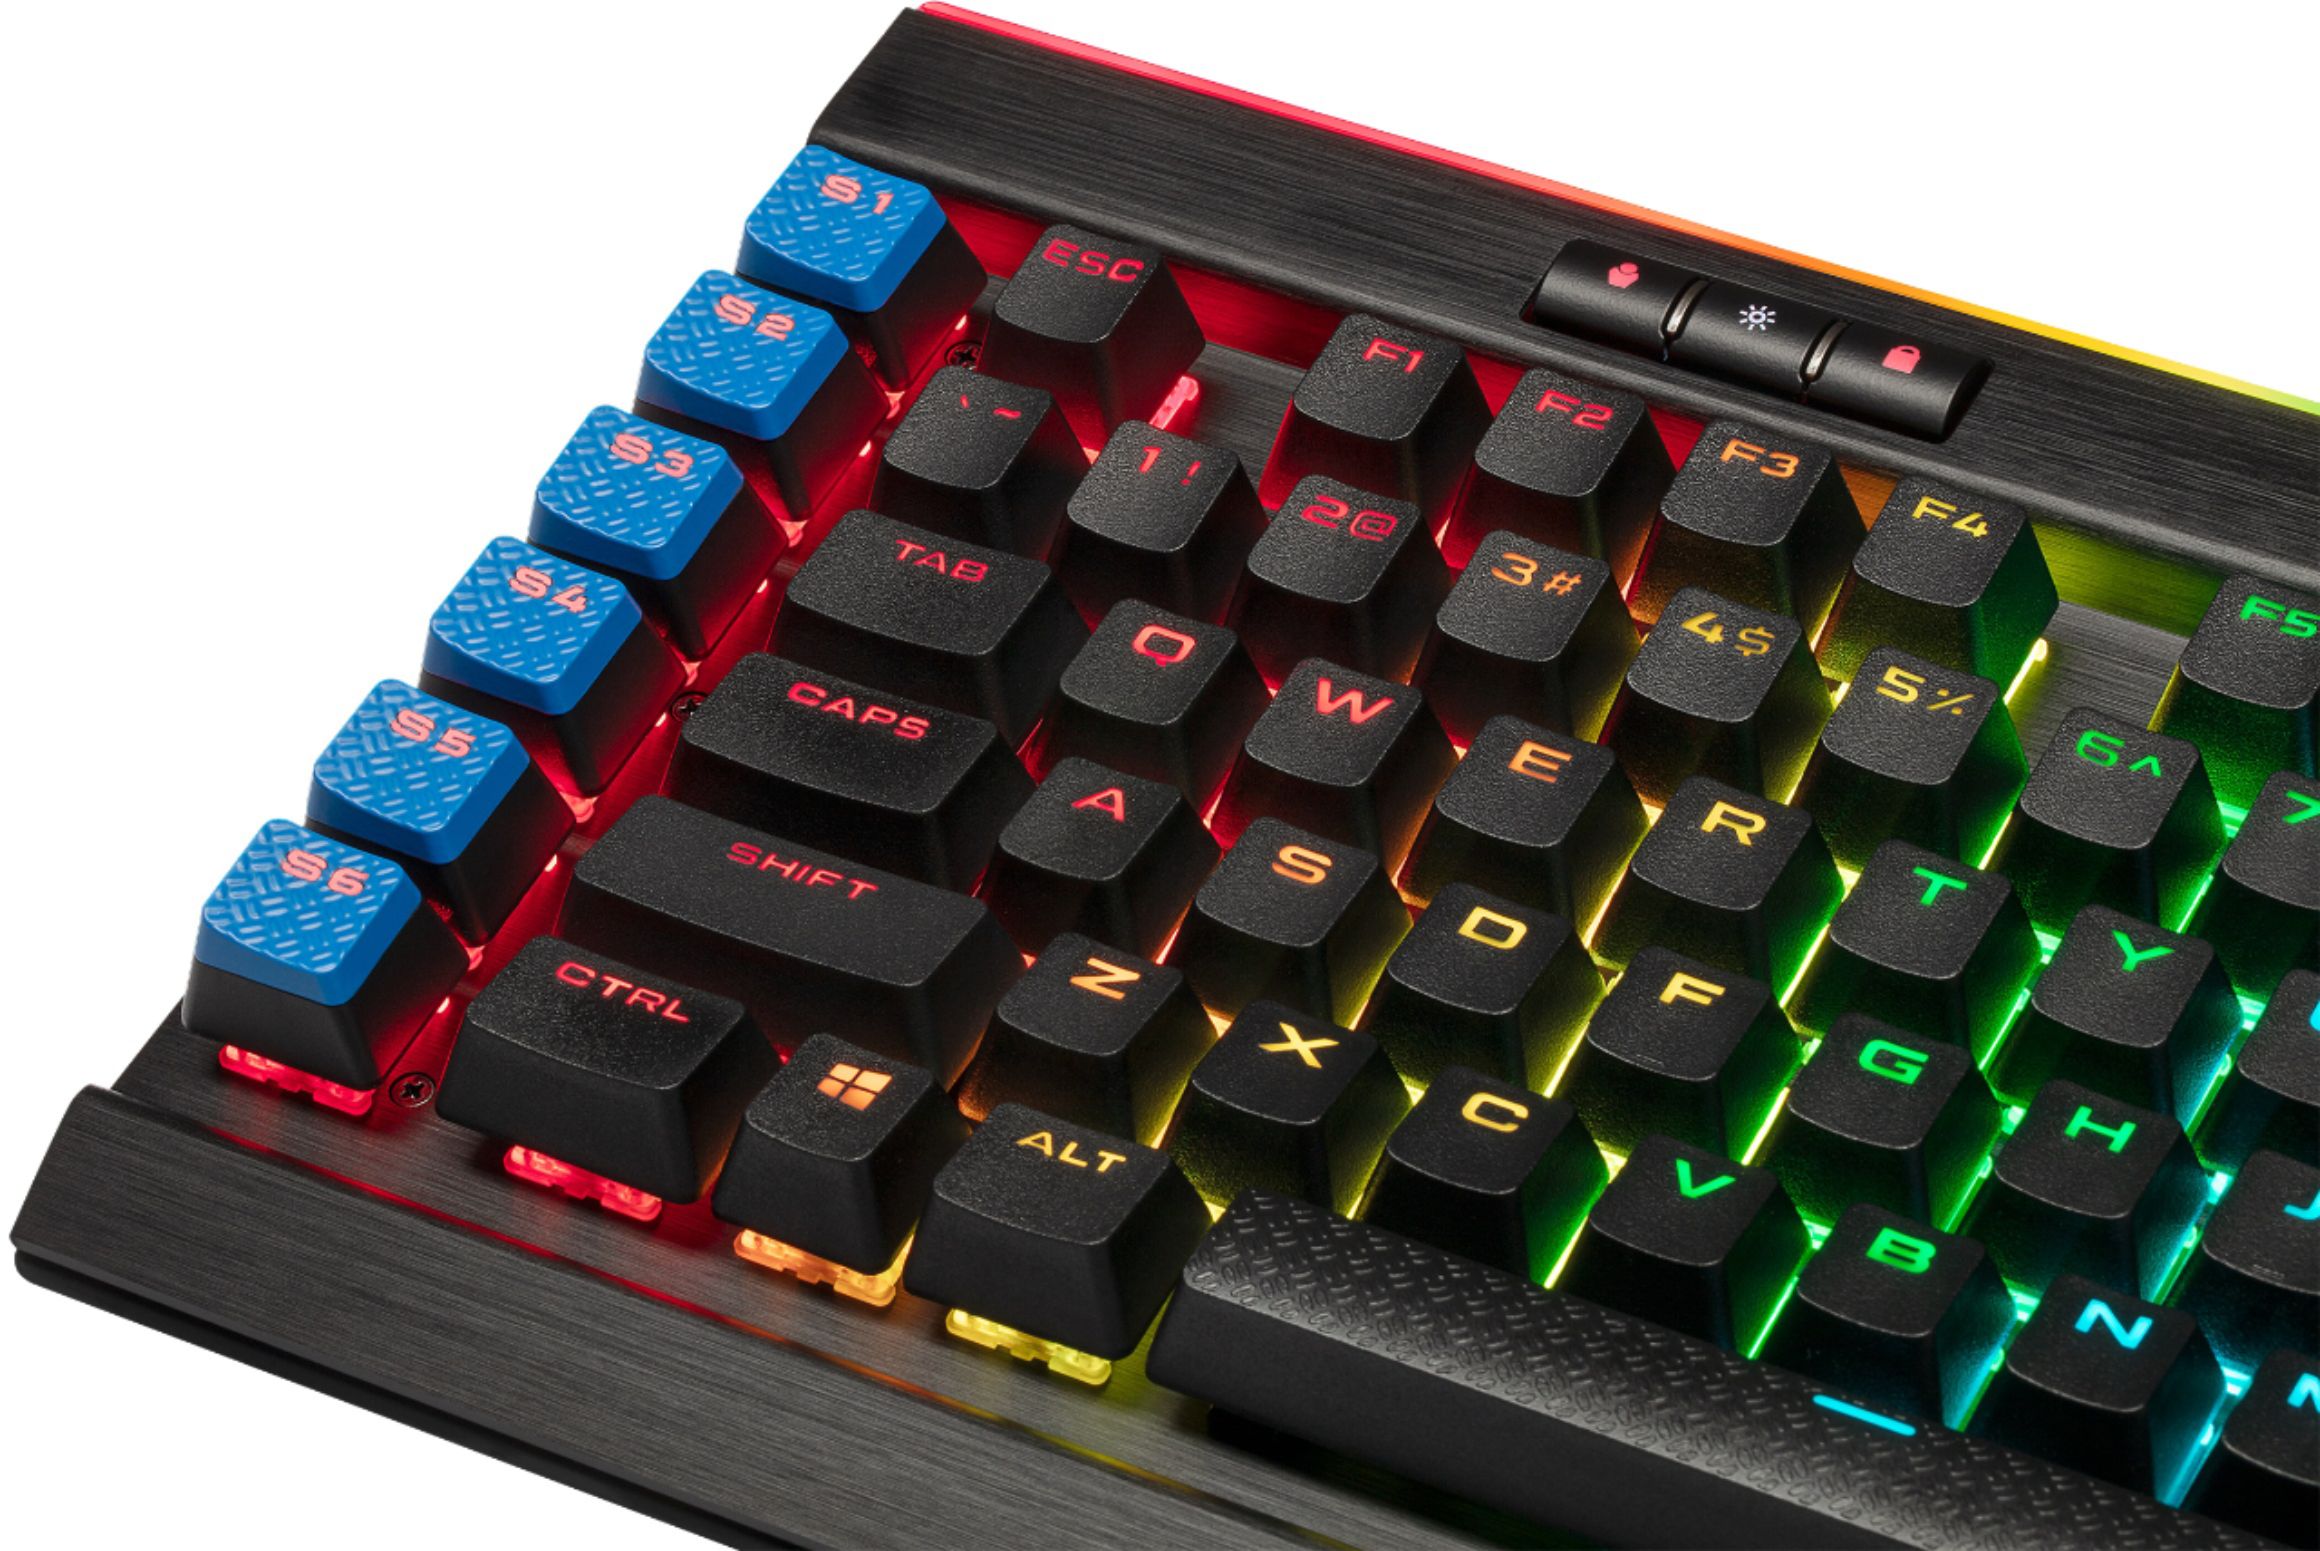 Buy: CORSAIR K95 RGB PLATINUM XT Full-size Wired Mechanical MX Speed Linear Switch Gaming Keyboard CH-9127414-NA